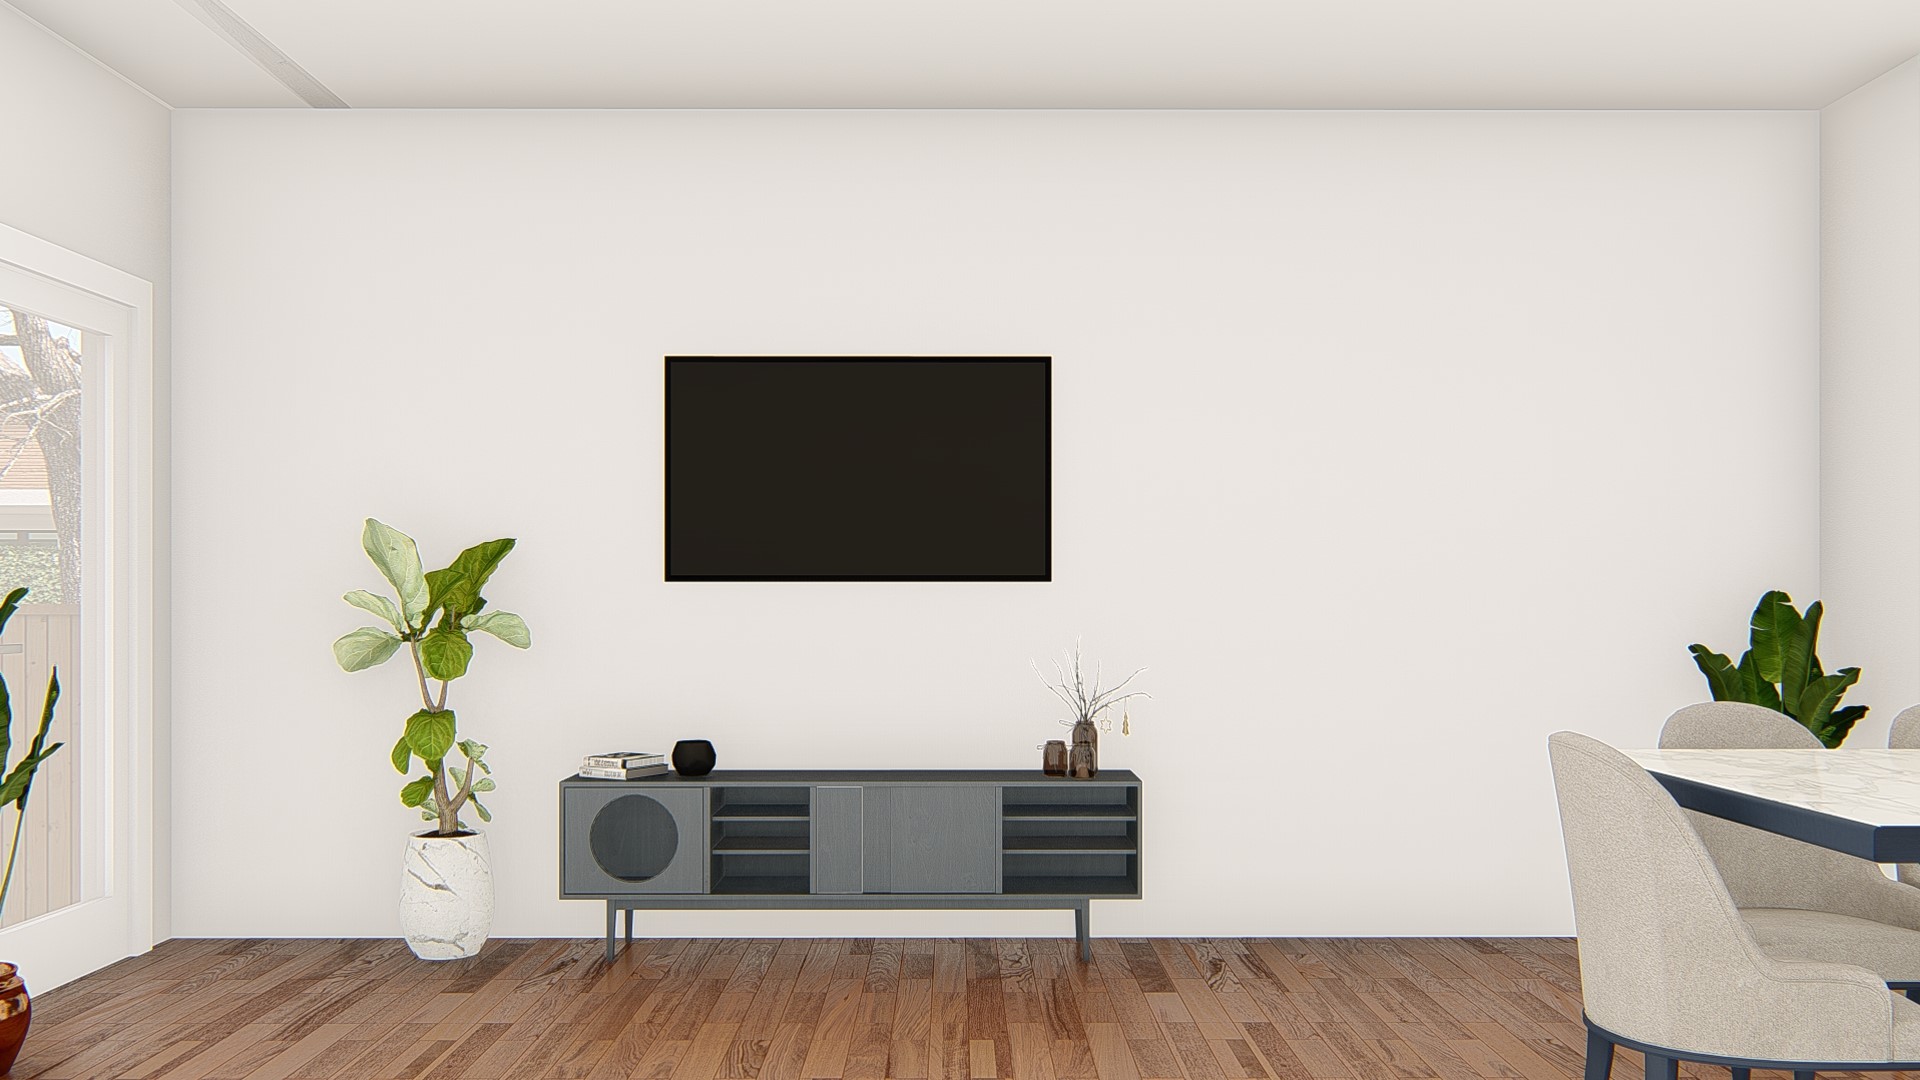 LIVING ROOM VIEW. This image is a close rendering of the final product